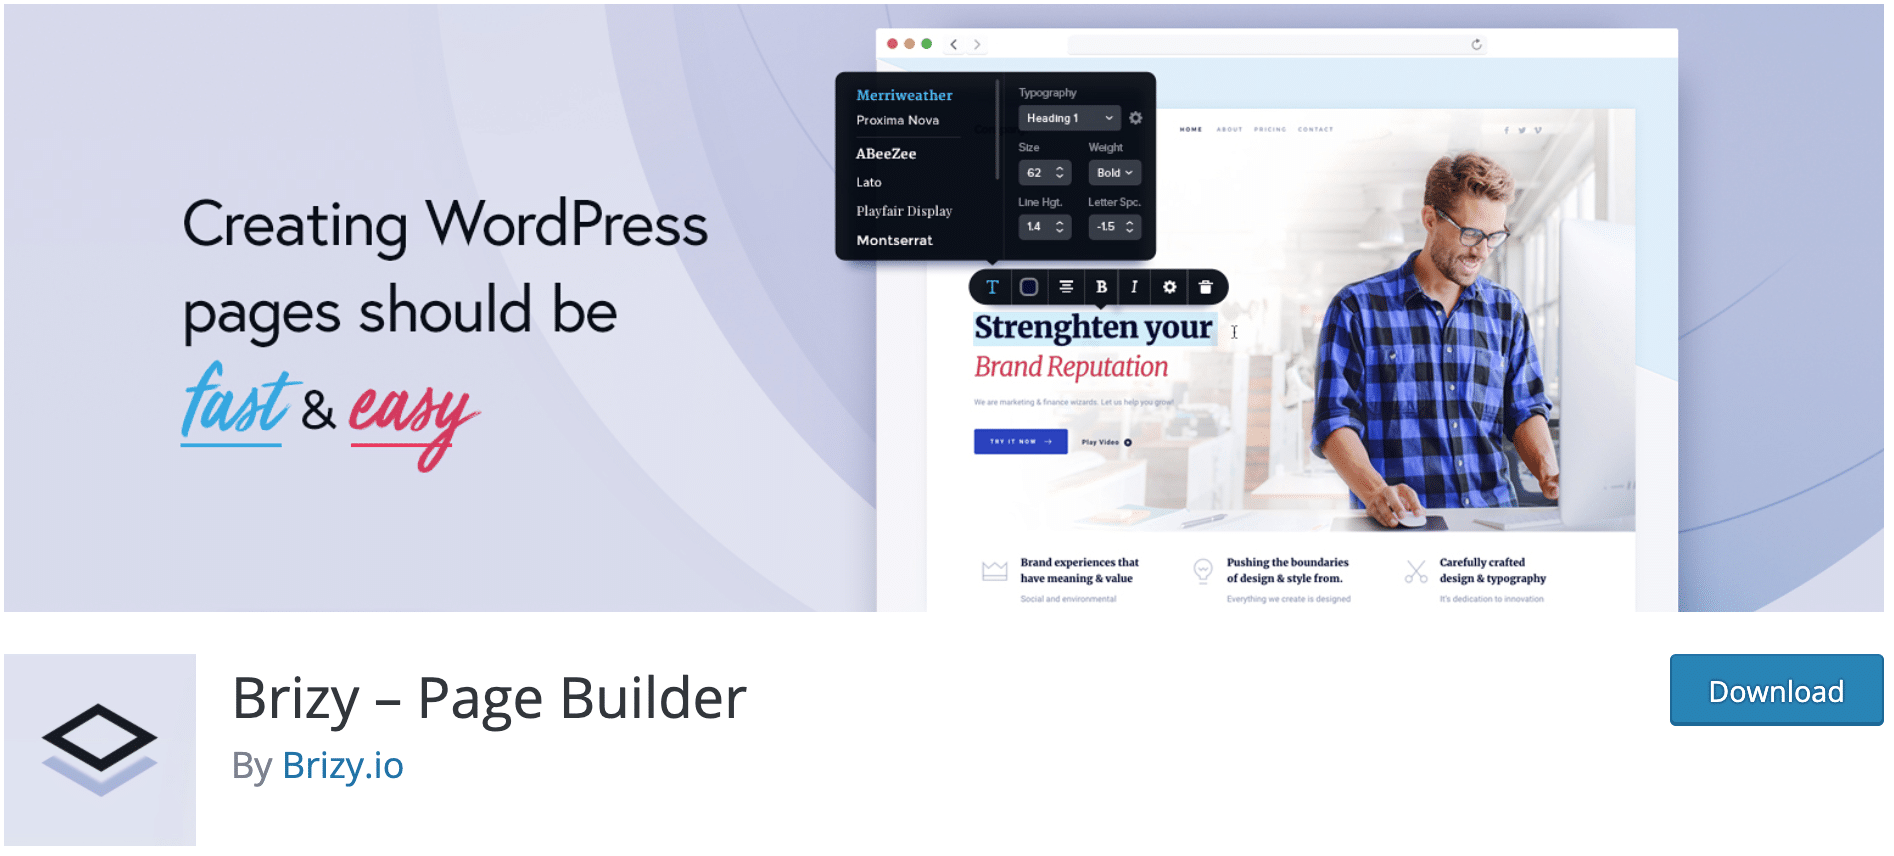 Brizy page builder to download on the WordPress plugin directory.